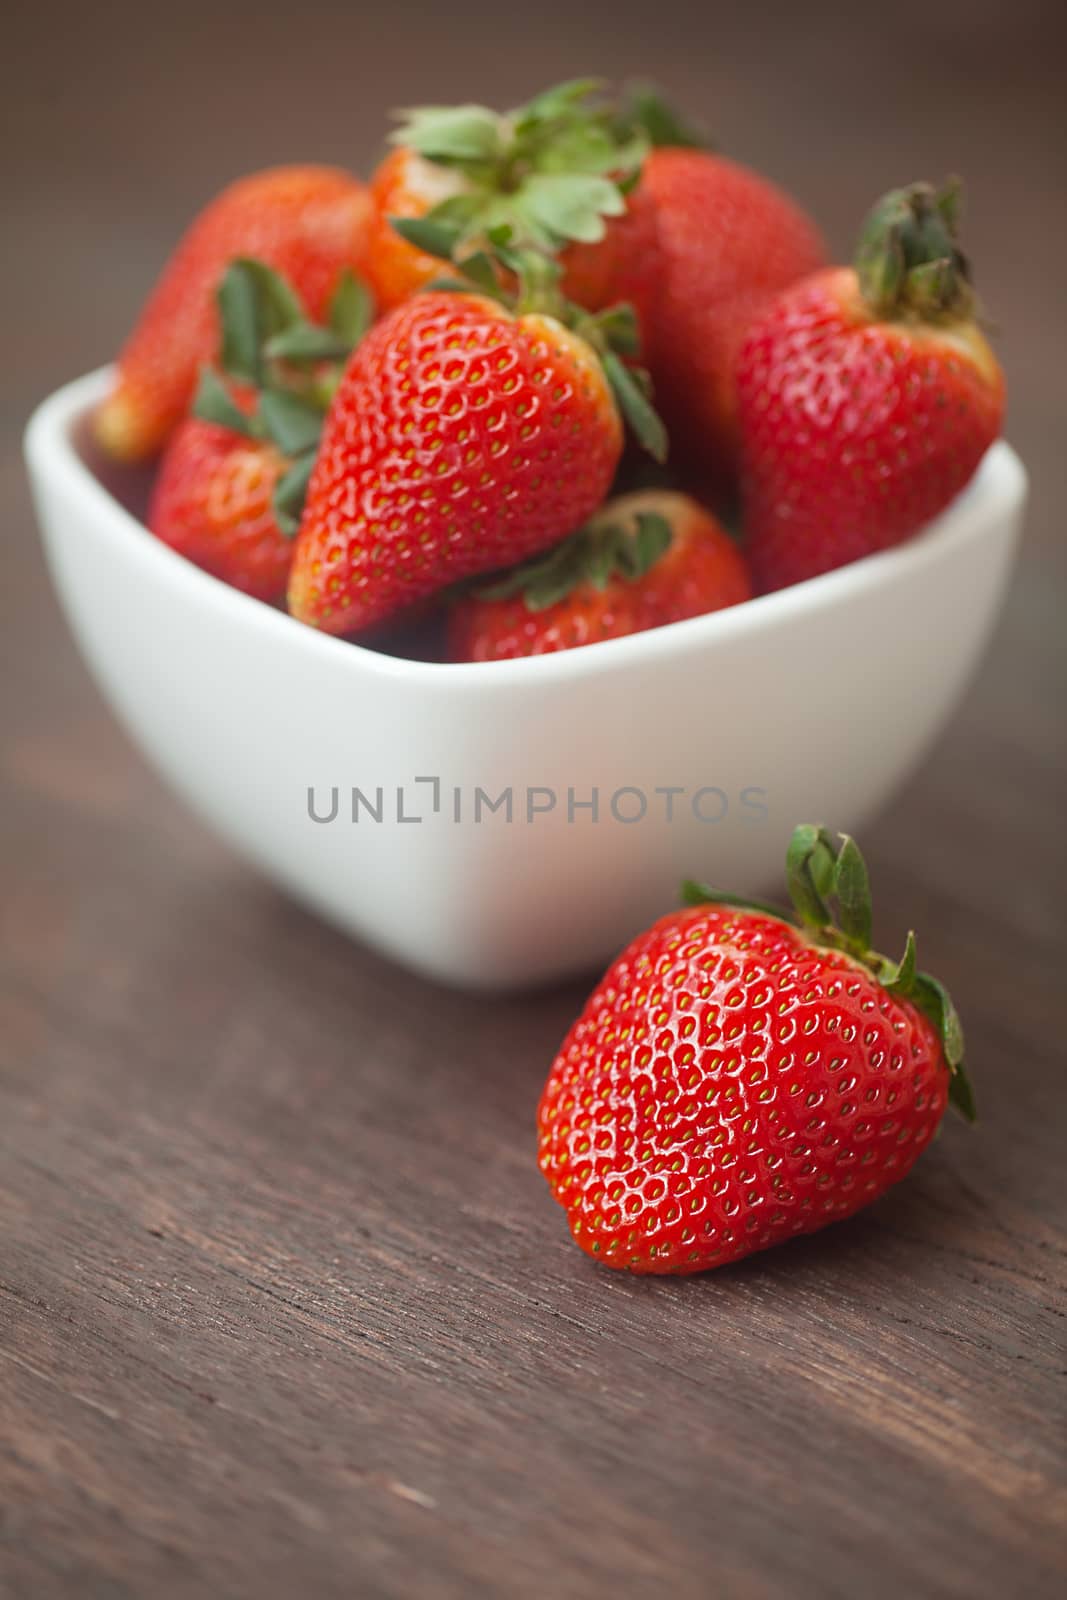 red juicy strawberry in a bowl on a wooden surface